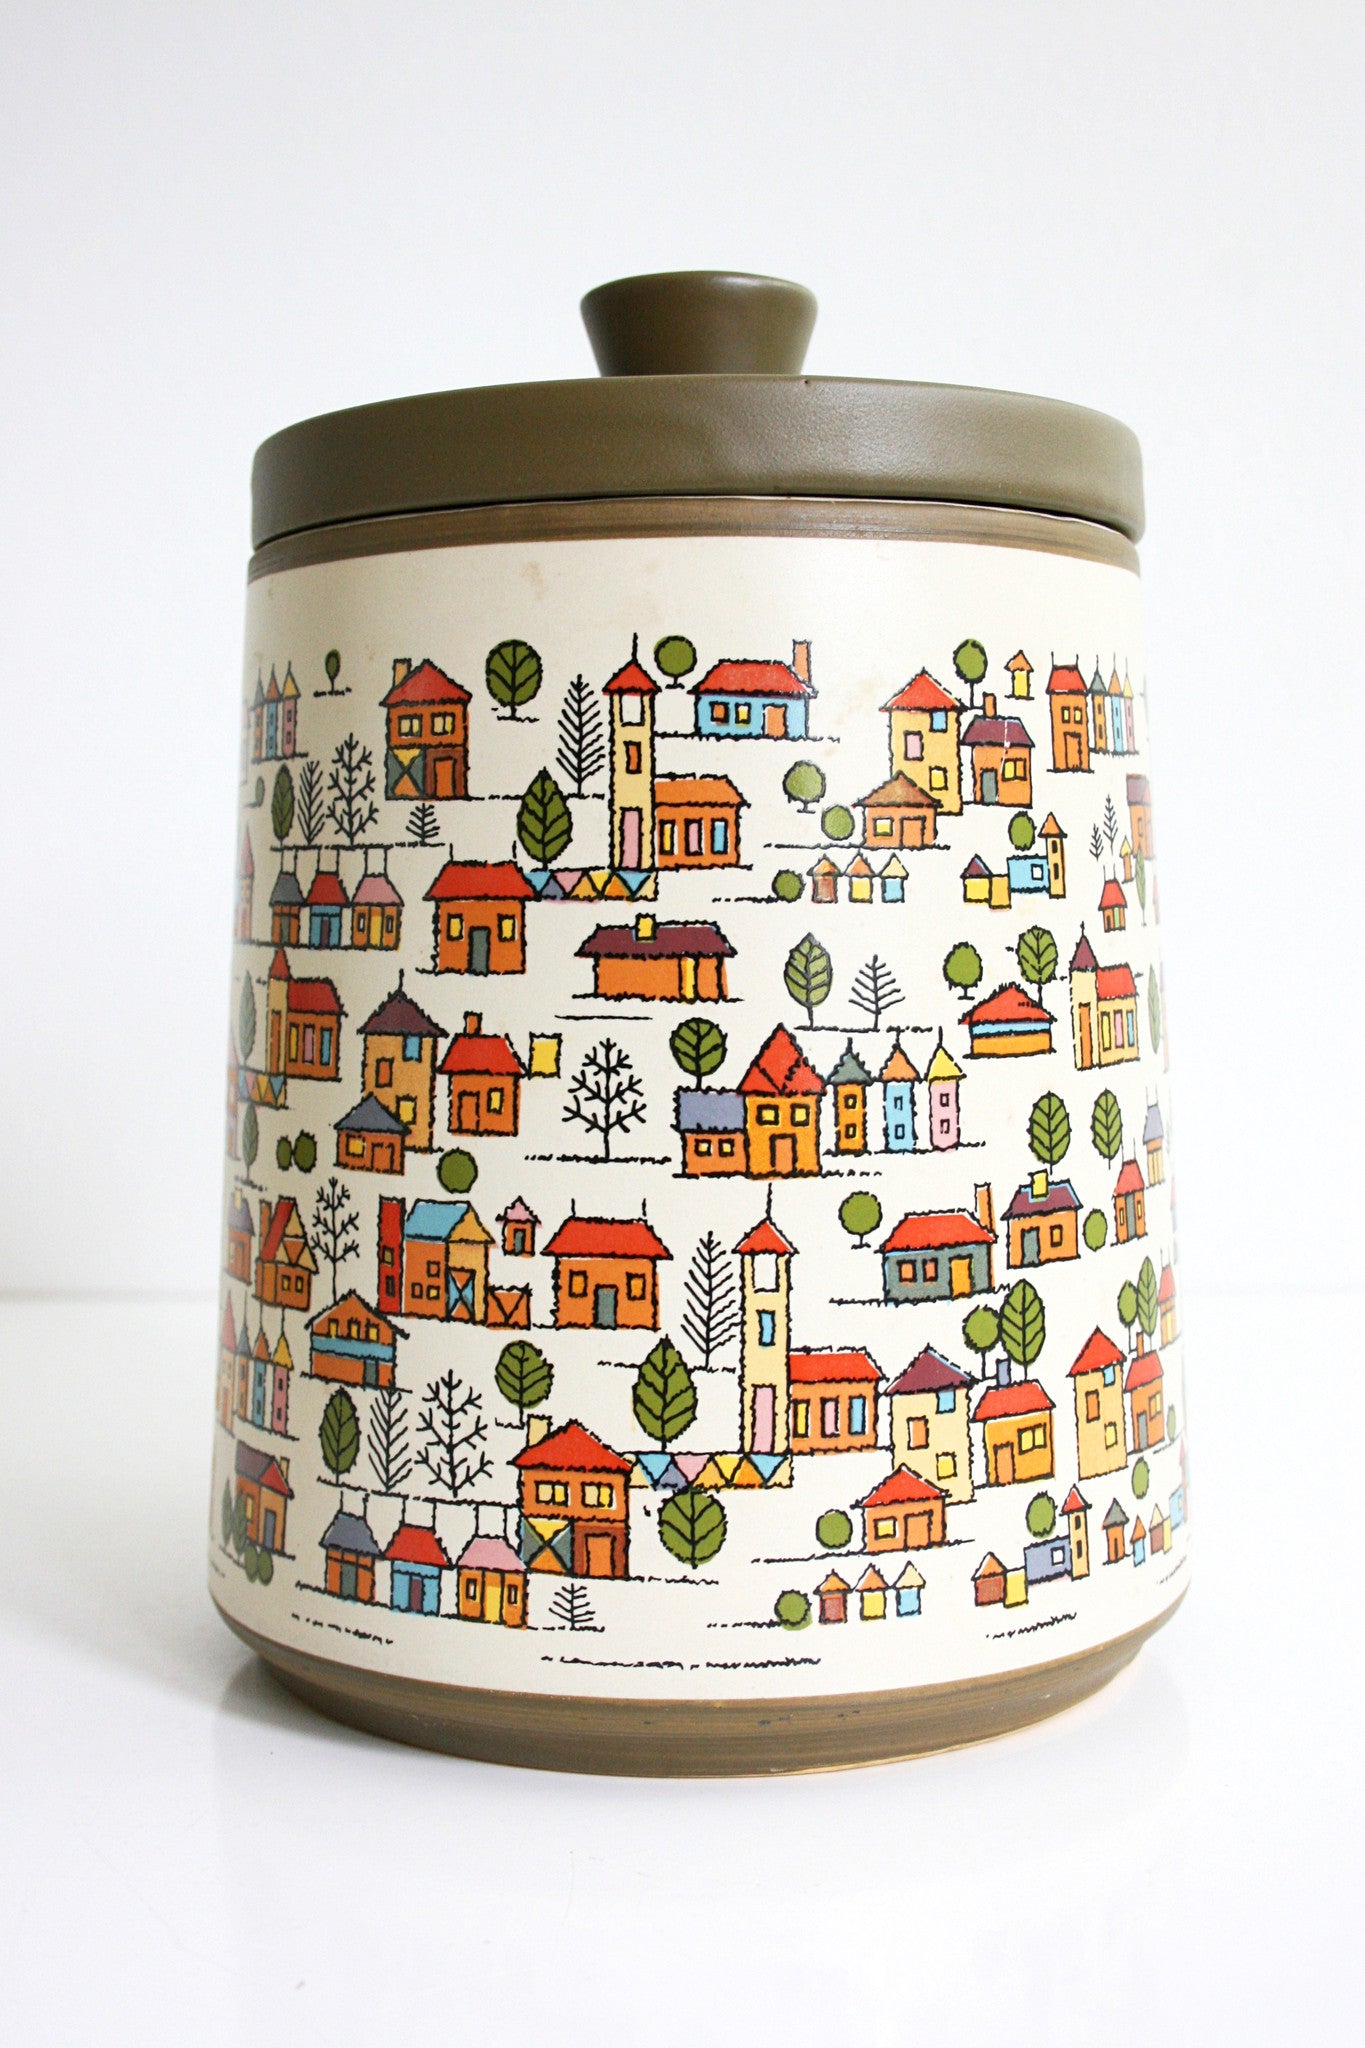 SOLD - Vintage Country Village Stoneware Canister Set / Vintage Houses Ceramic Canisters From Japan